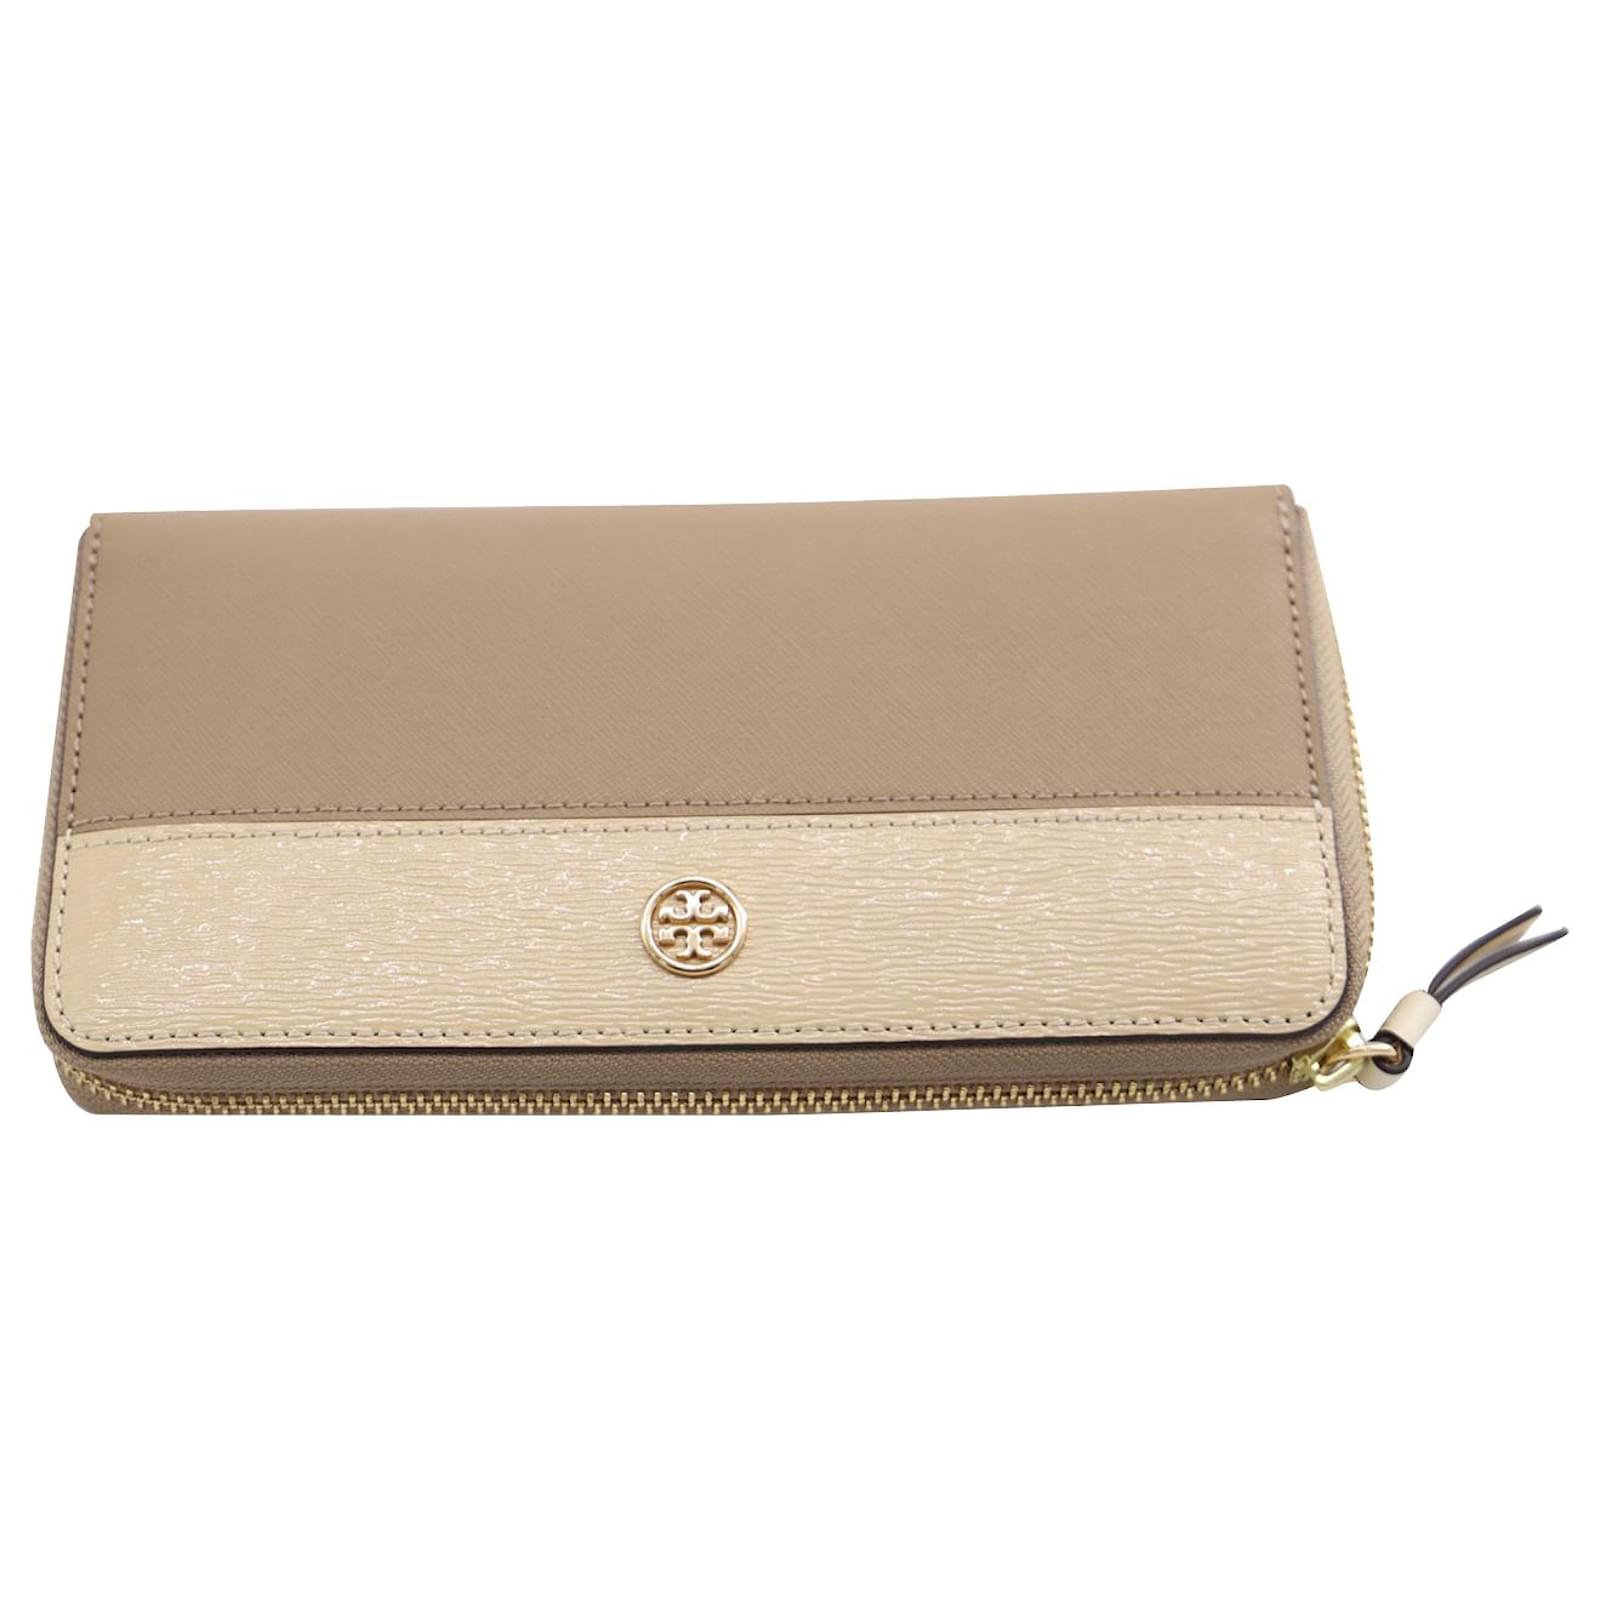 Tory Burch Robinson Zip Continental wallet wristlet navy leather 